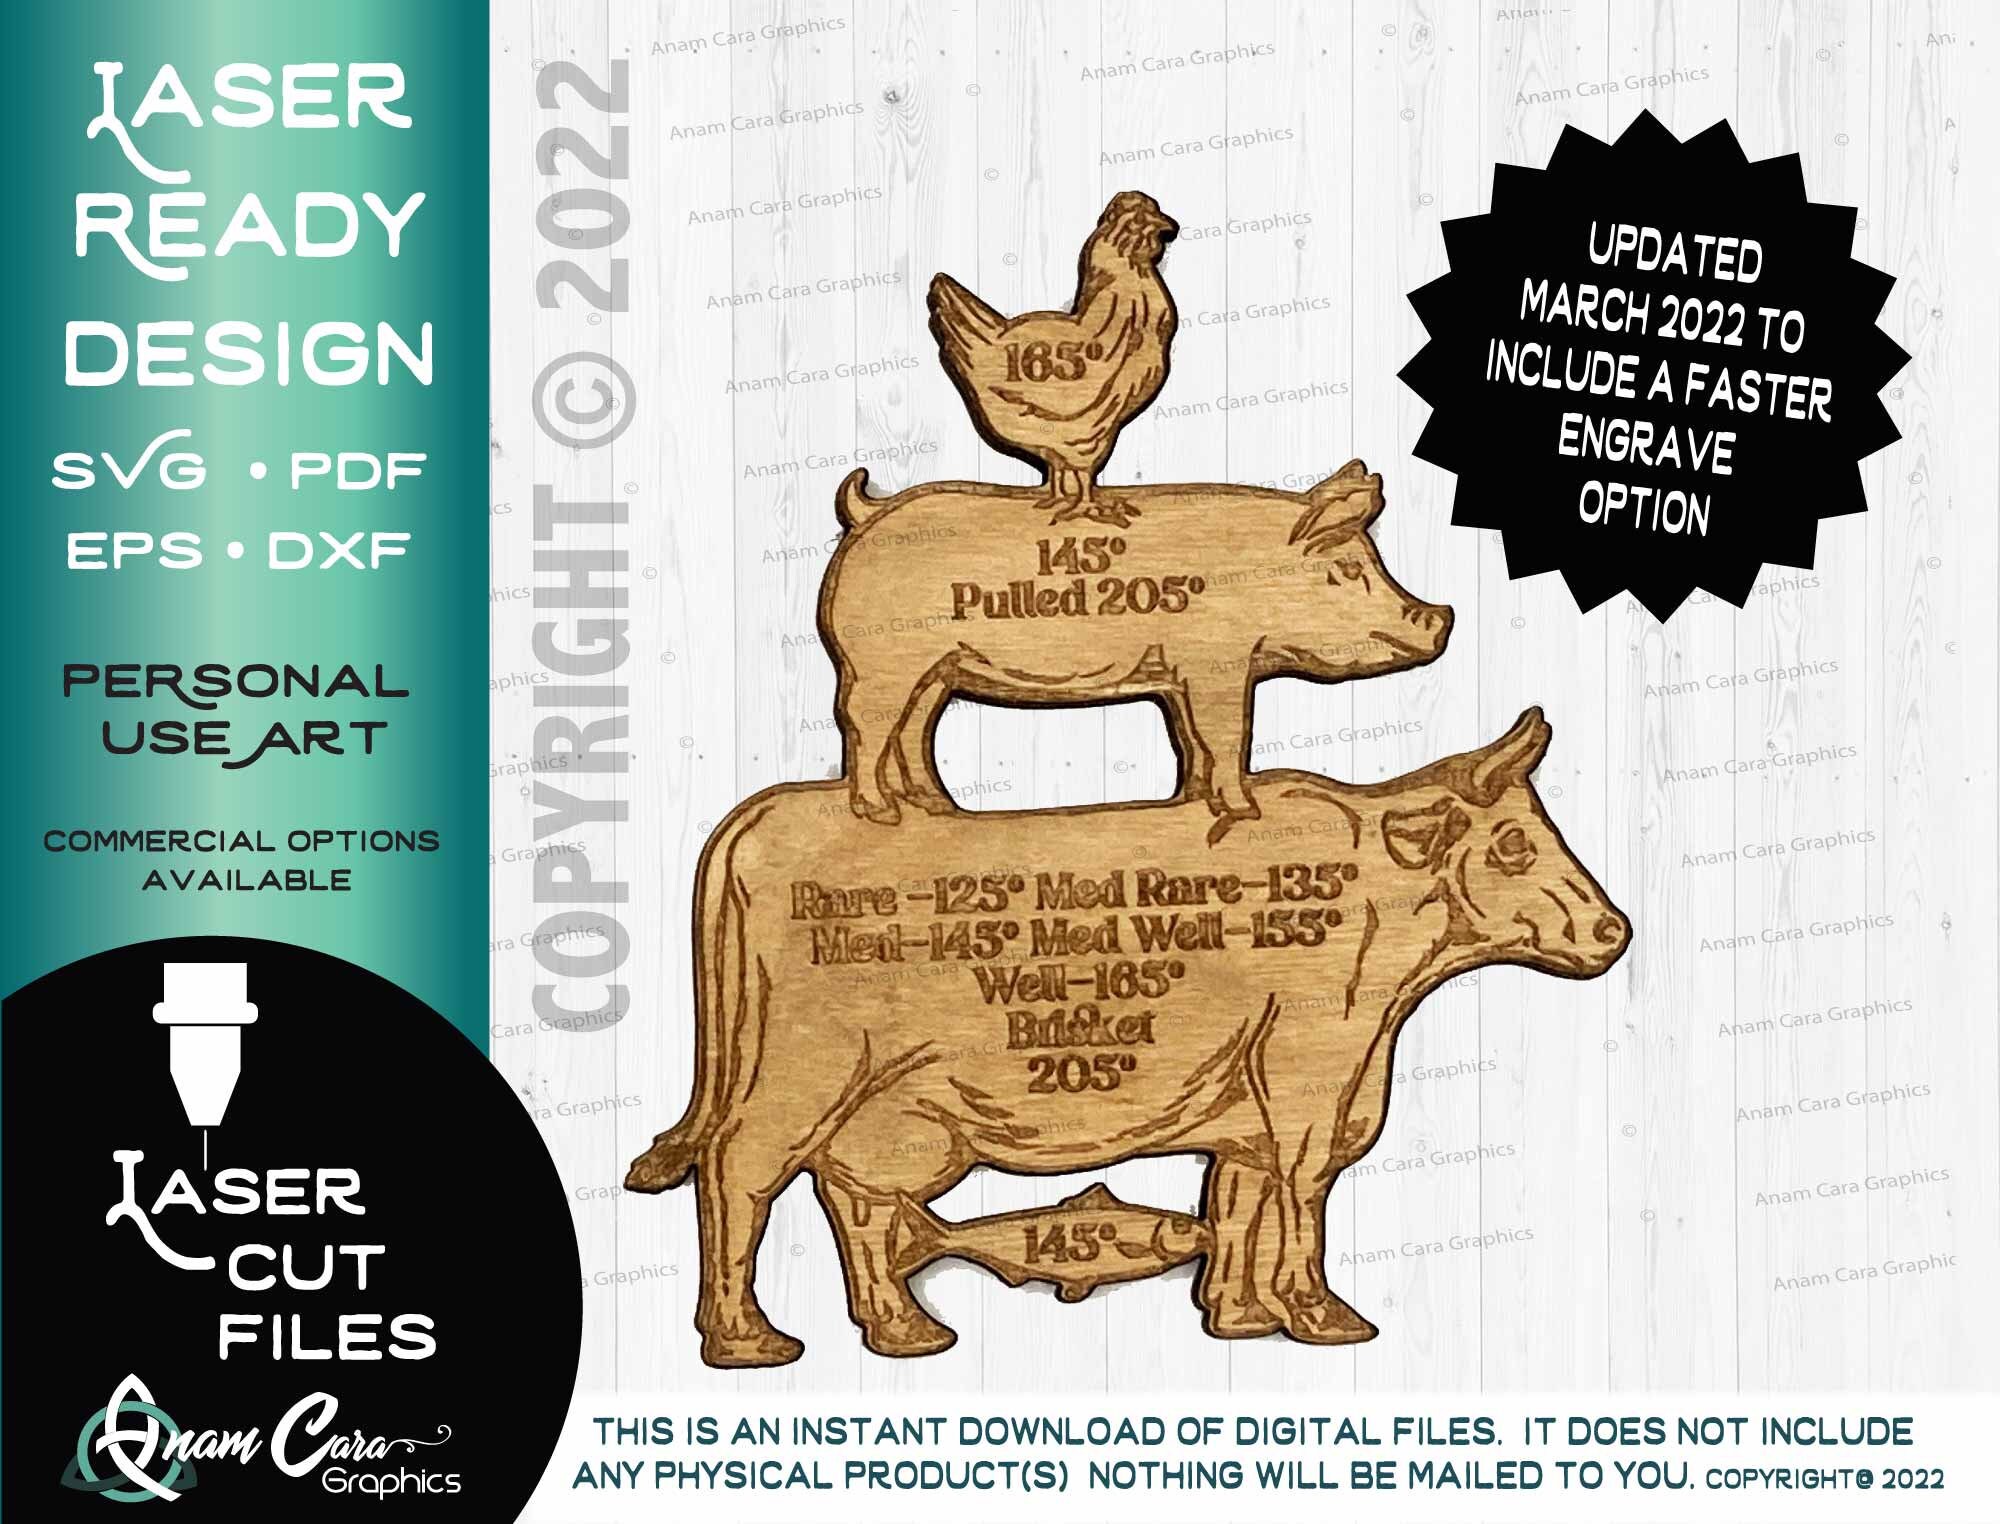 Wooden Meat Cooking Temp Magnets Laser Engraved Cow Pig Chicken and Fish  shaped, Grilling Gifts,Meat Temp Magnet,Meat Temp Sign,Grill Magnet